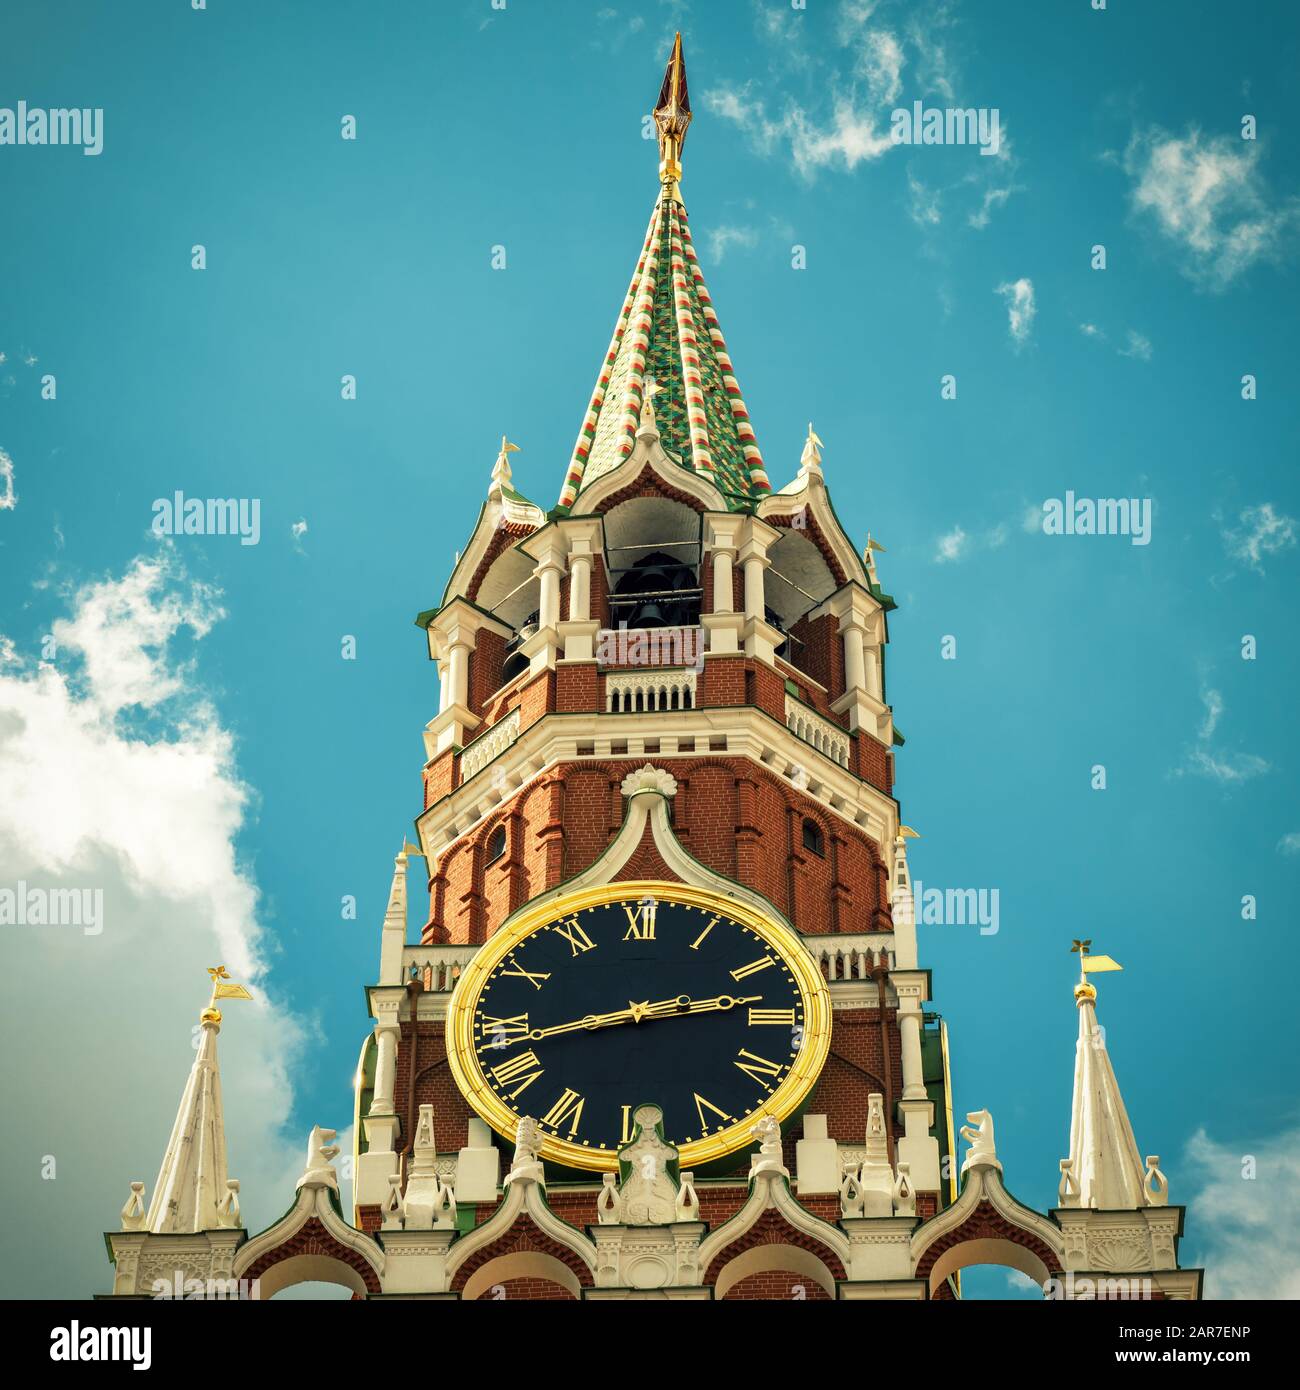 The Spasskaya tower of Moscow Kremlin, Russia. The Moscow Kremlin is the residence of the Russian president and the main tourist attraction of Moscow. Stock Photo